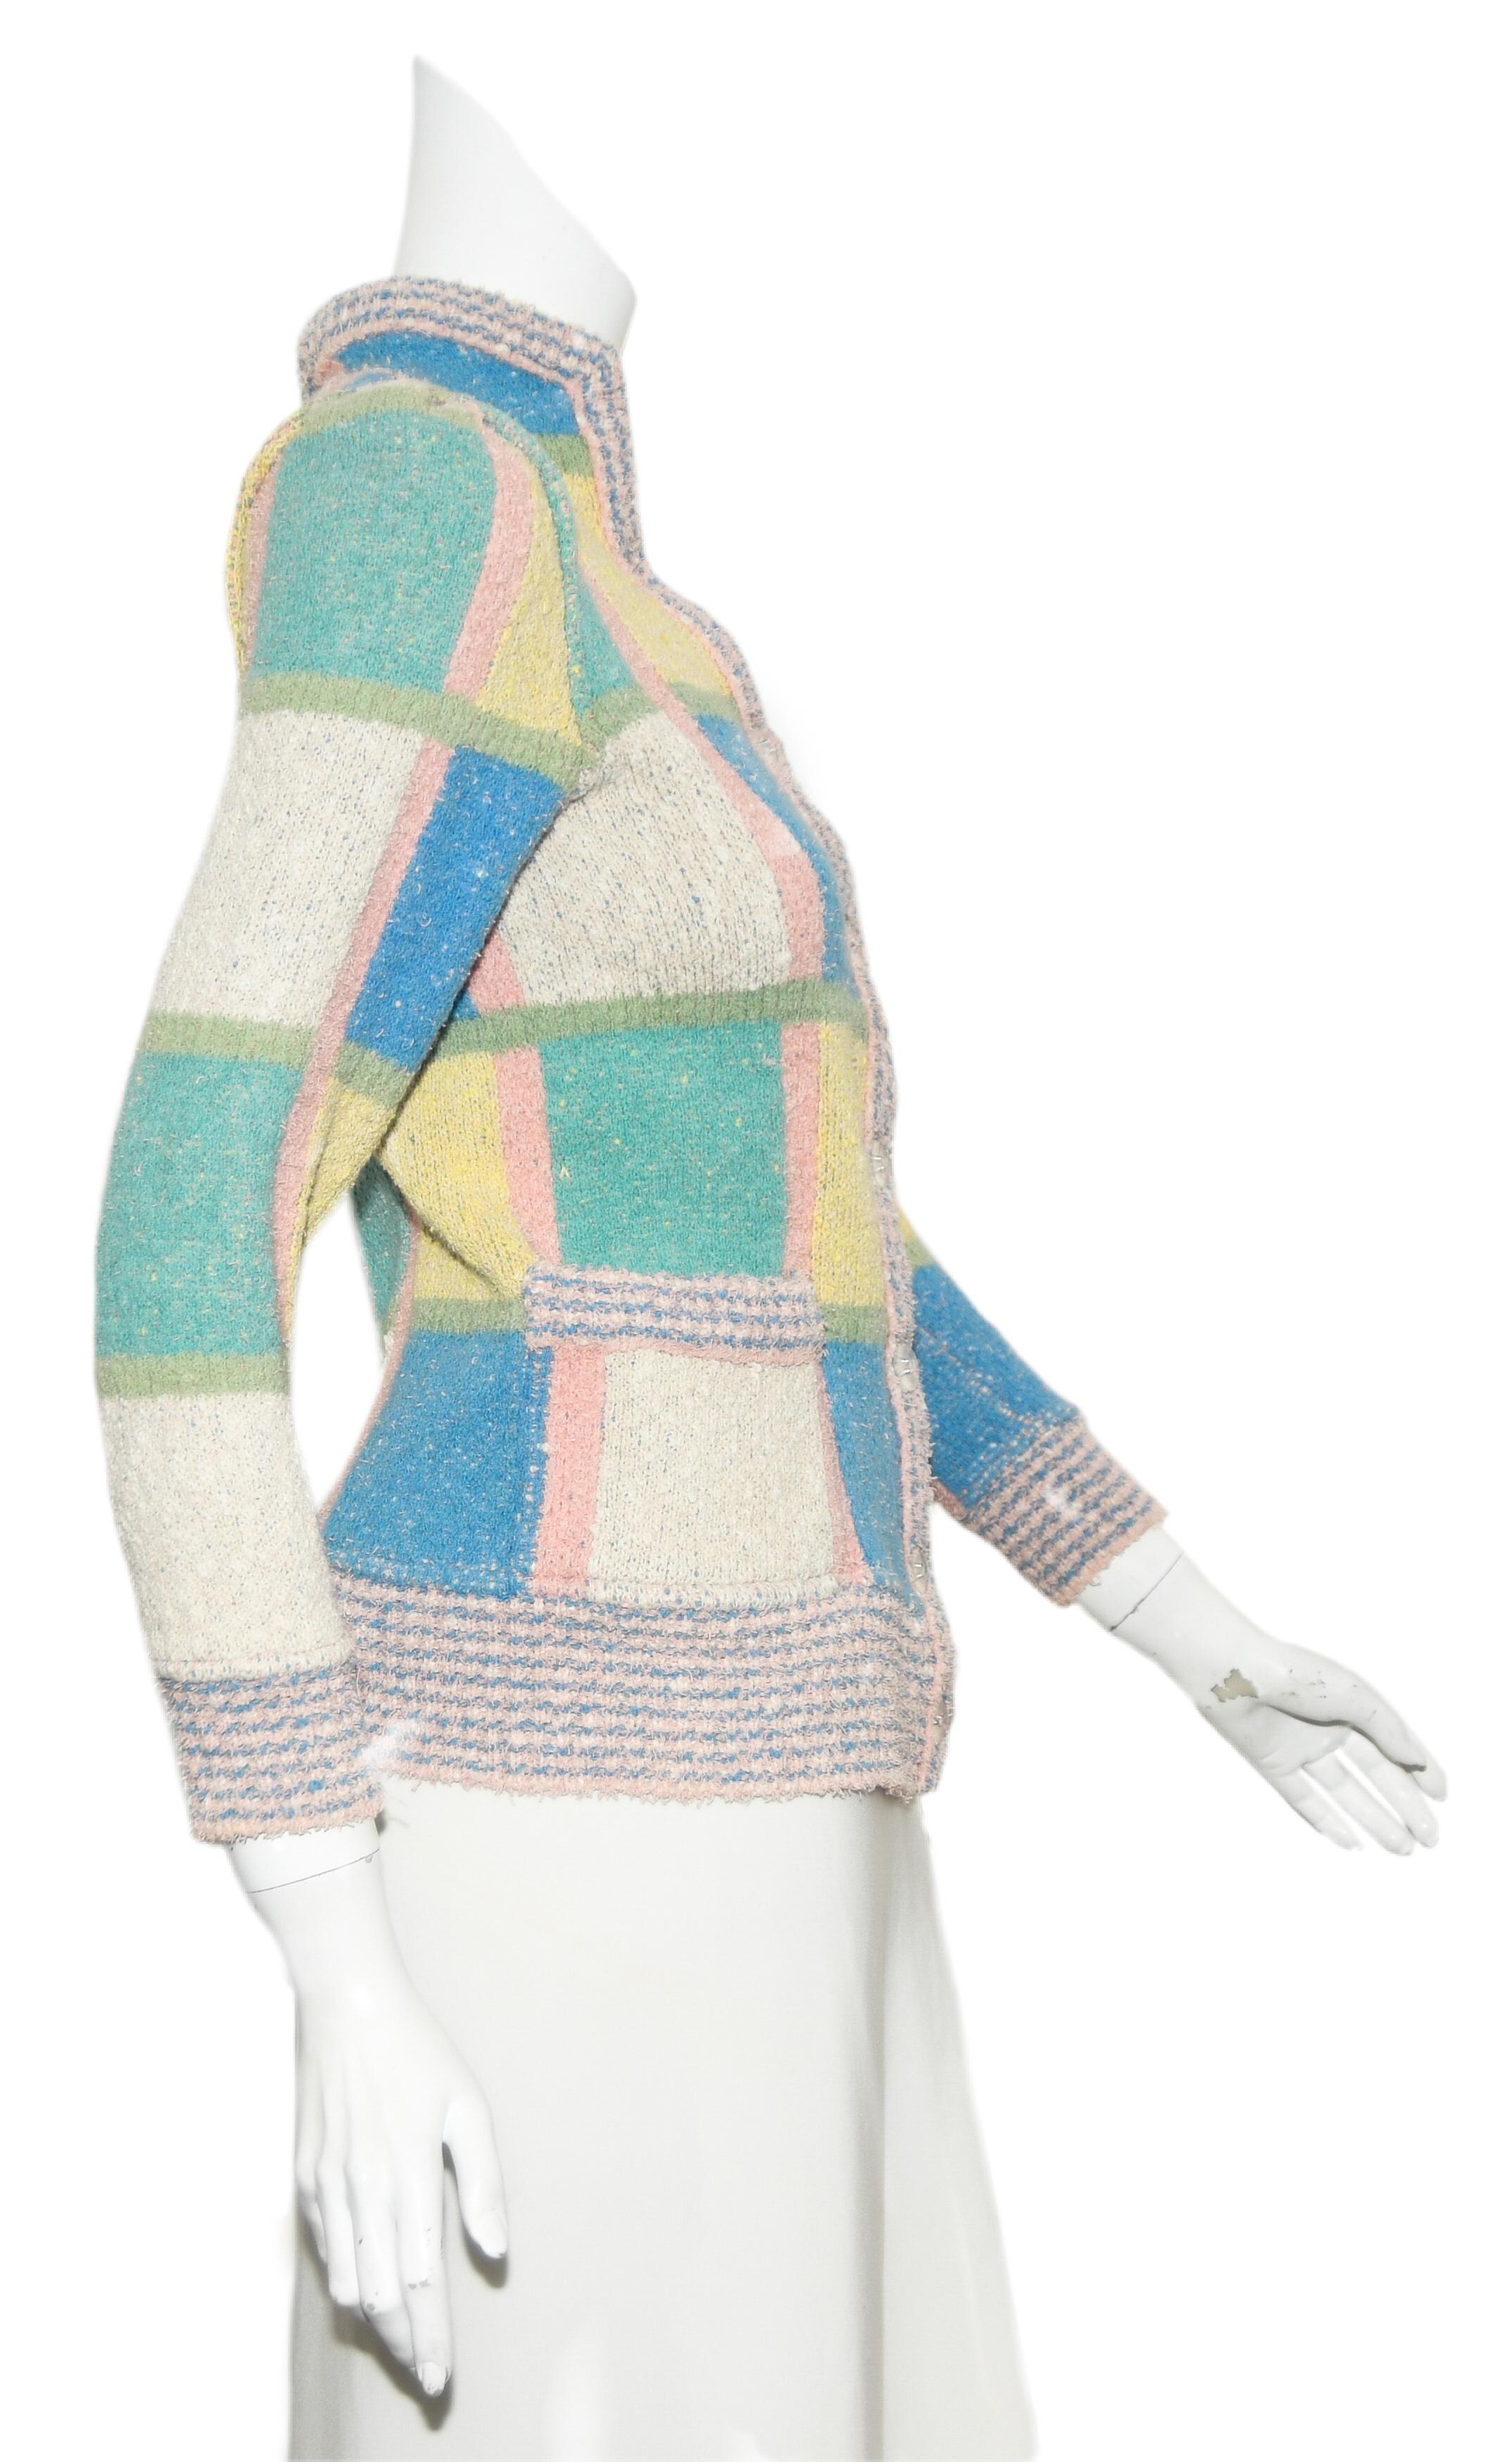 Missoni multi 1970's mod pastel color sweater jacket includes large check pattern throughout.  This jacket is not lined.  For closure 7 clear buttons at front.  The long sleeves and hem are ribbed.  This jacket was inspired by the 1970s Mod shaggy